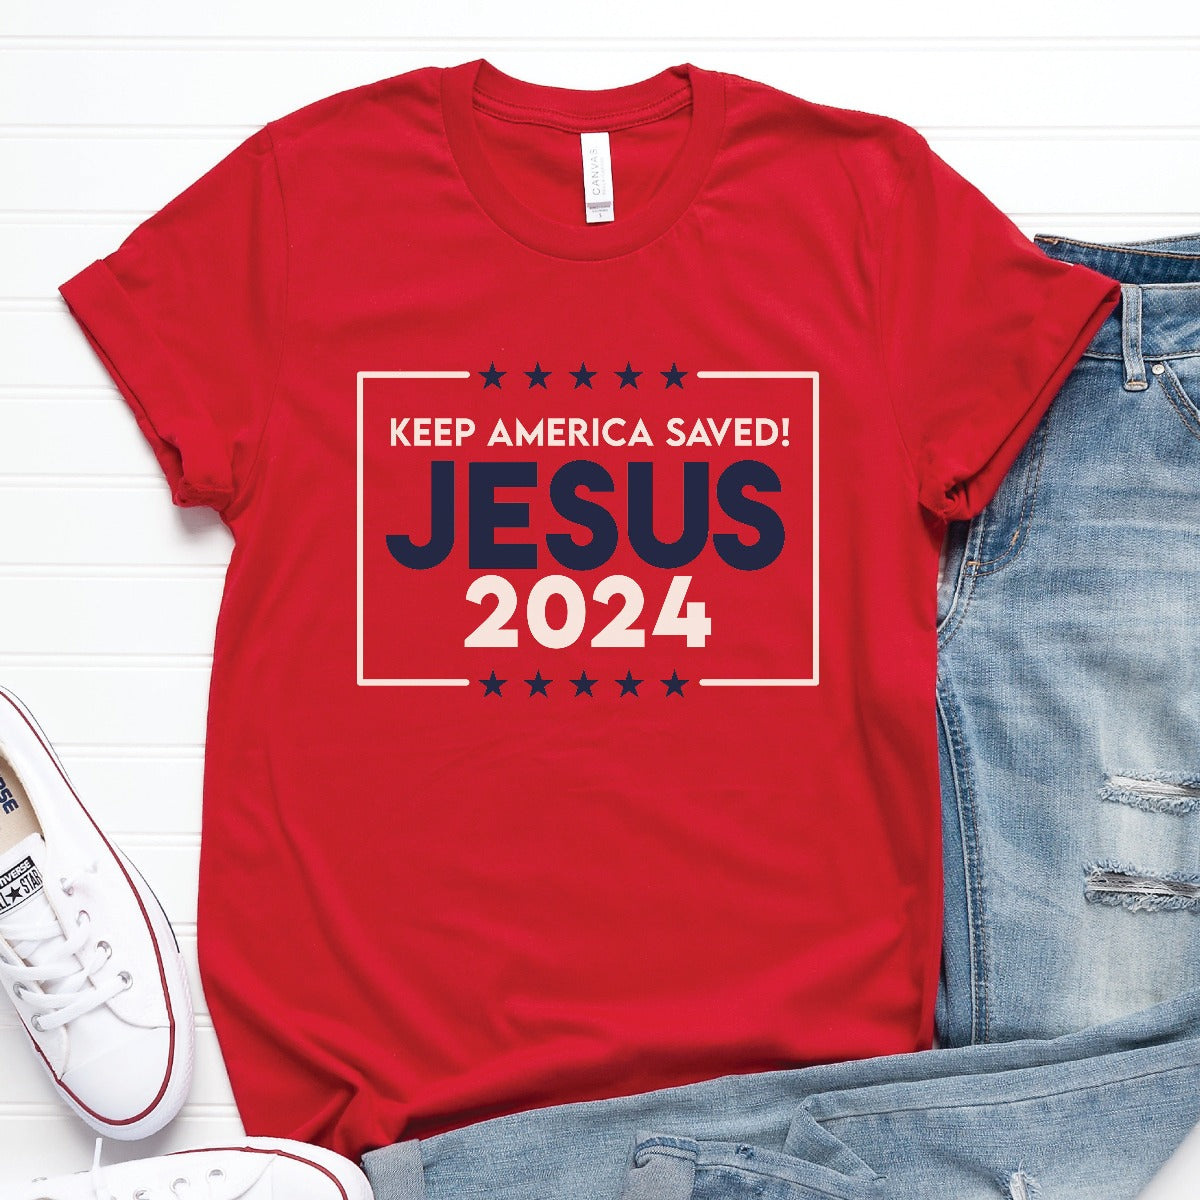 Patriotic red stars and stripes Presidential election vote unisex Christian t-shirts that say "Jesus 2024 Keep America Saved" in bold red, white, and blue fonts, made in the USA for men and women God & Country Patriots